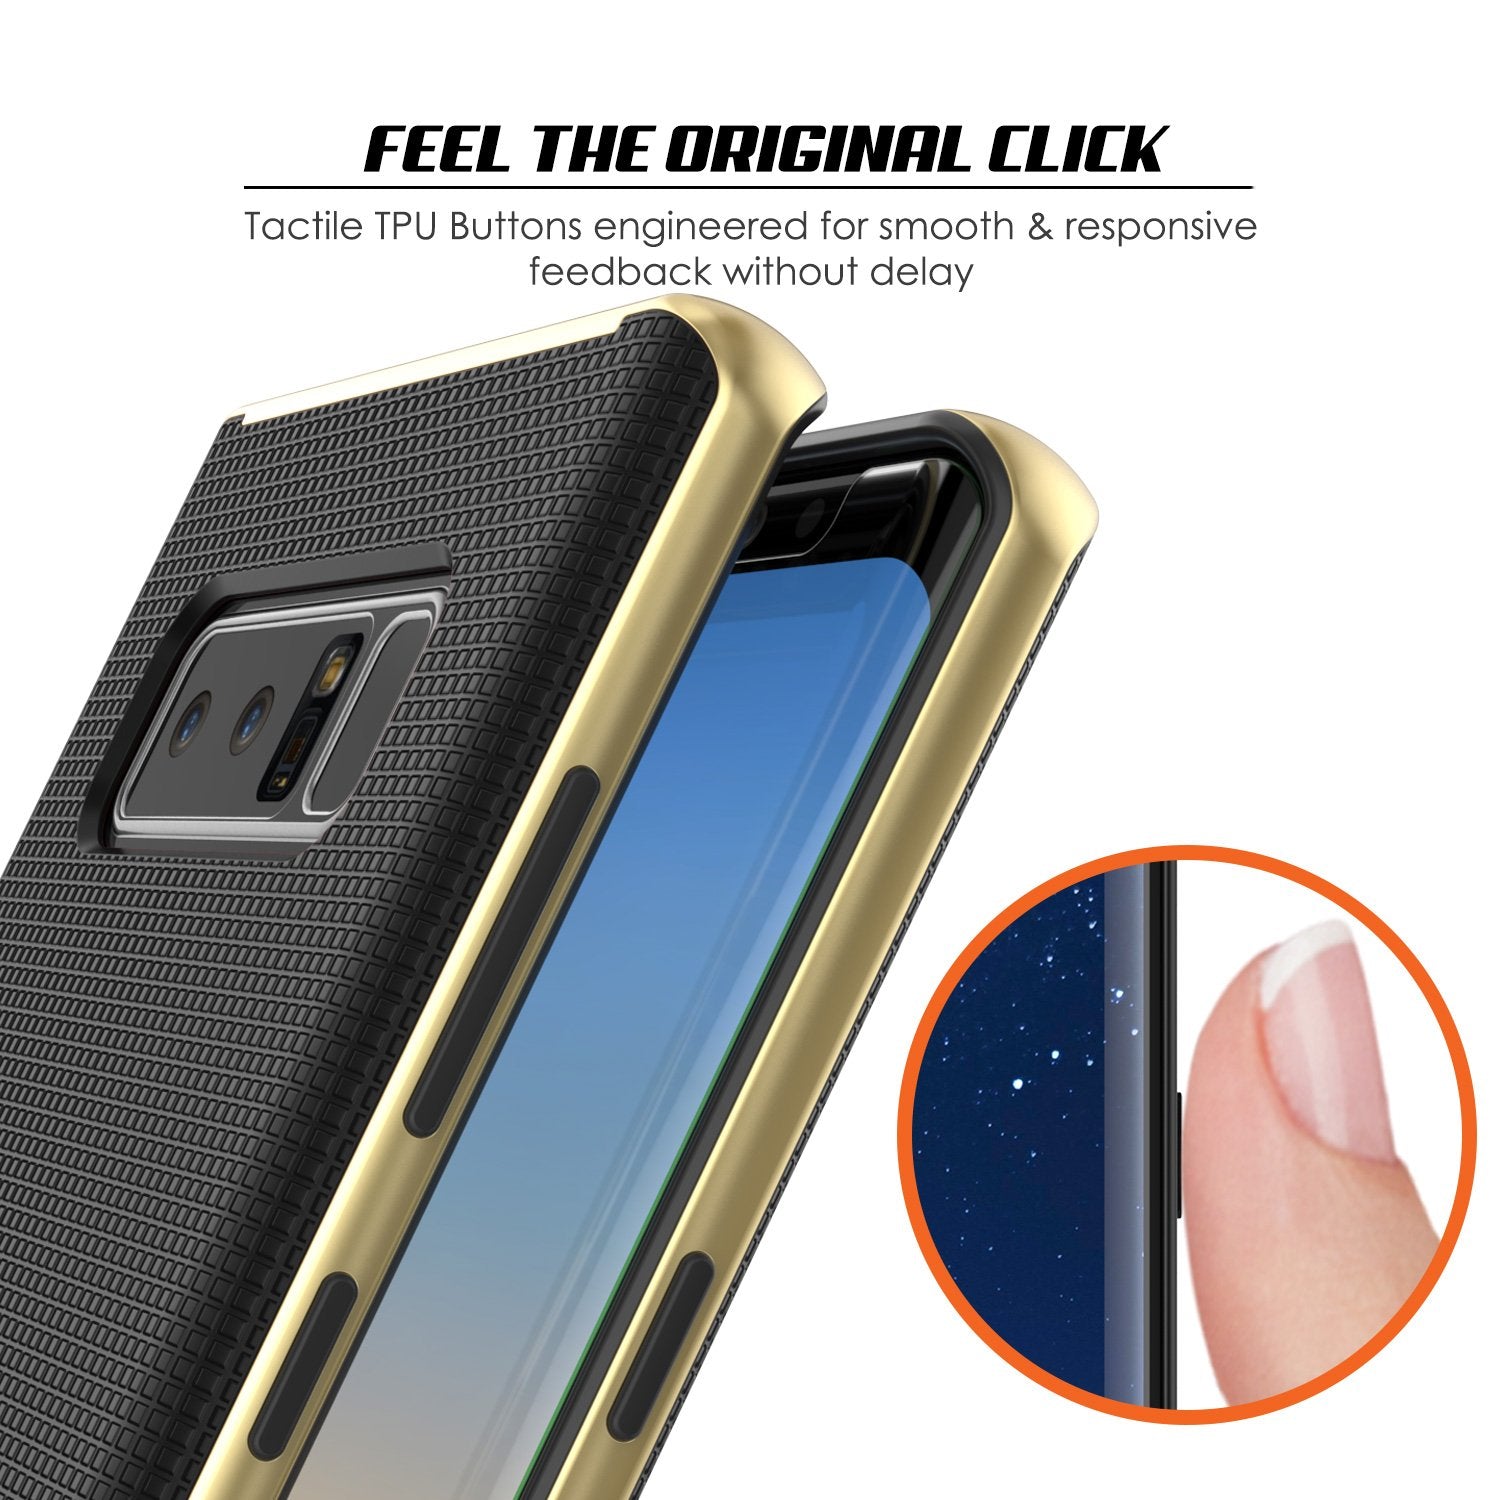 Galaxy Note 8 Screen/Shock Protective Dual Layer Case [Gold]